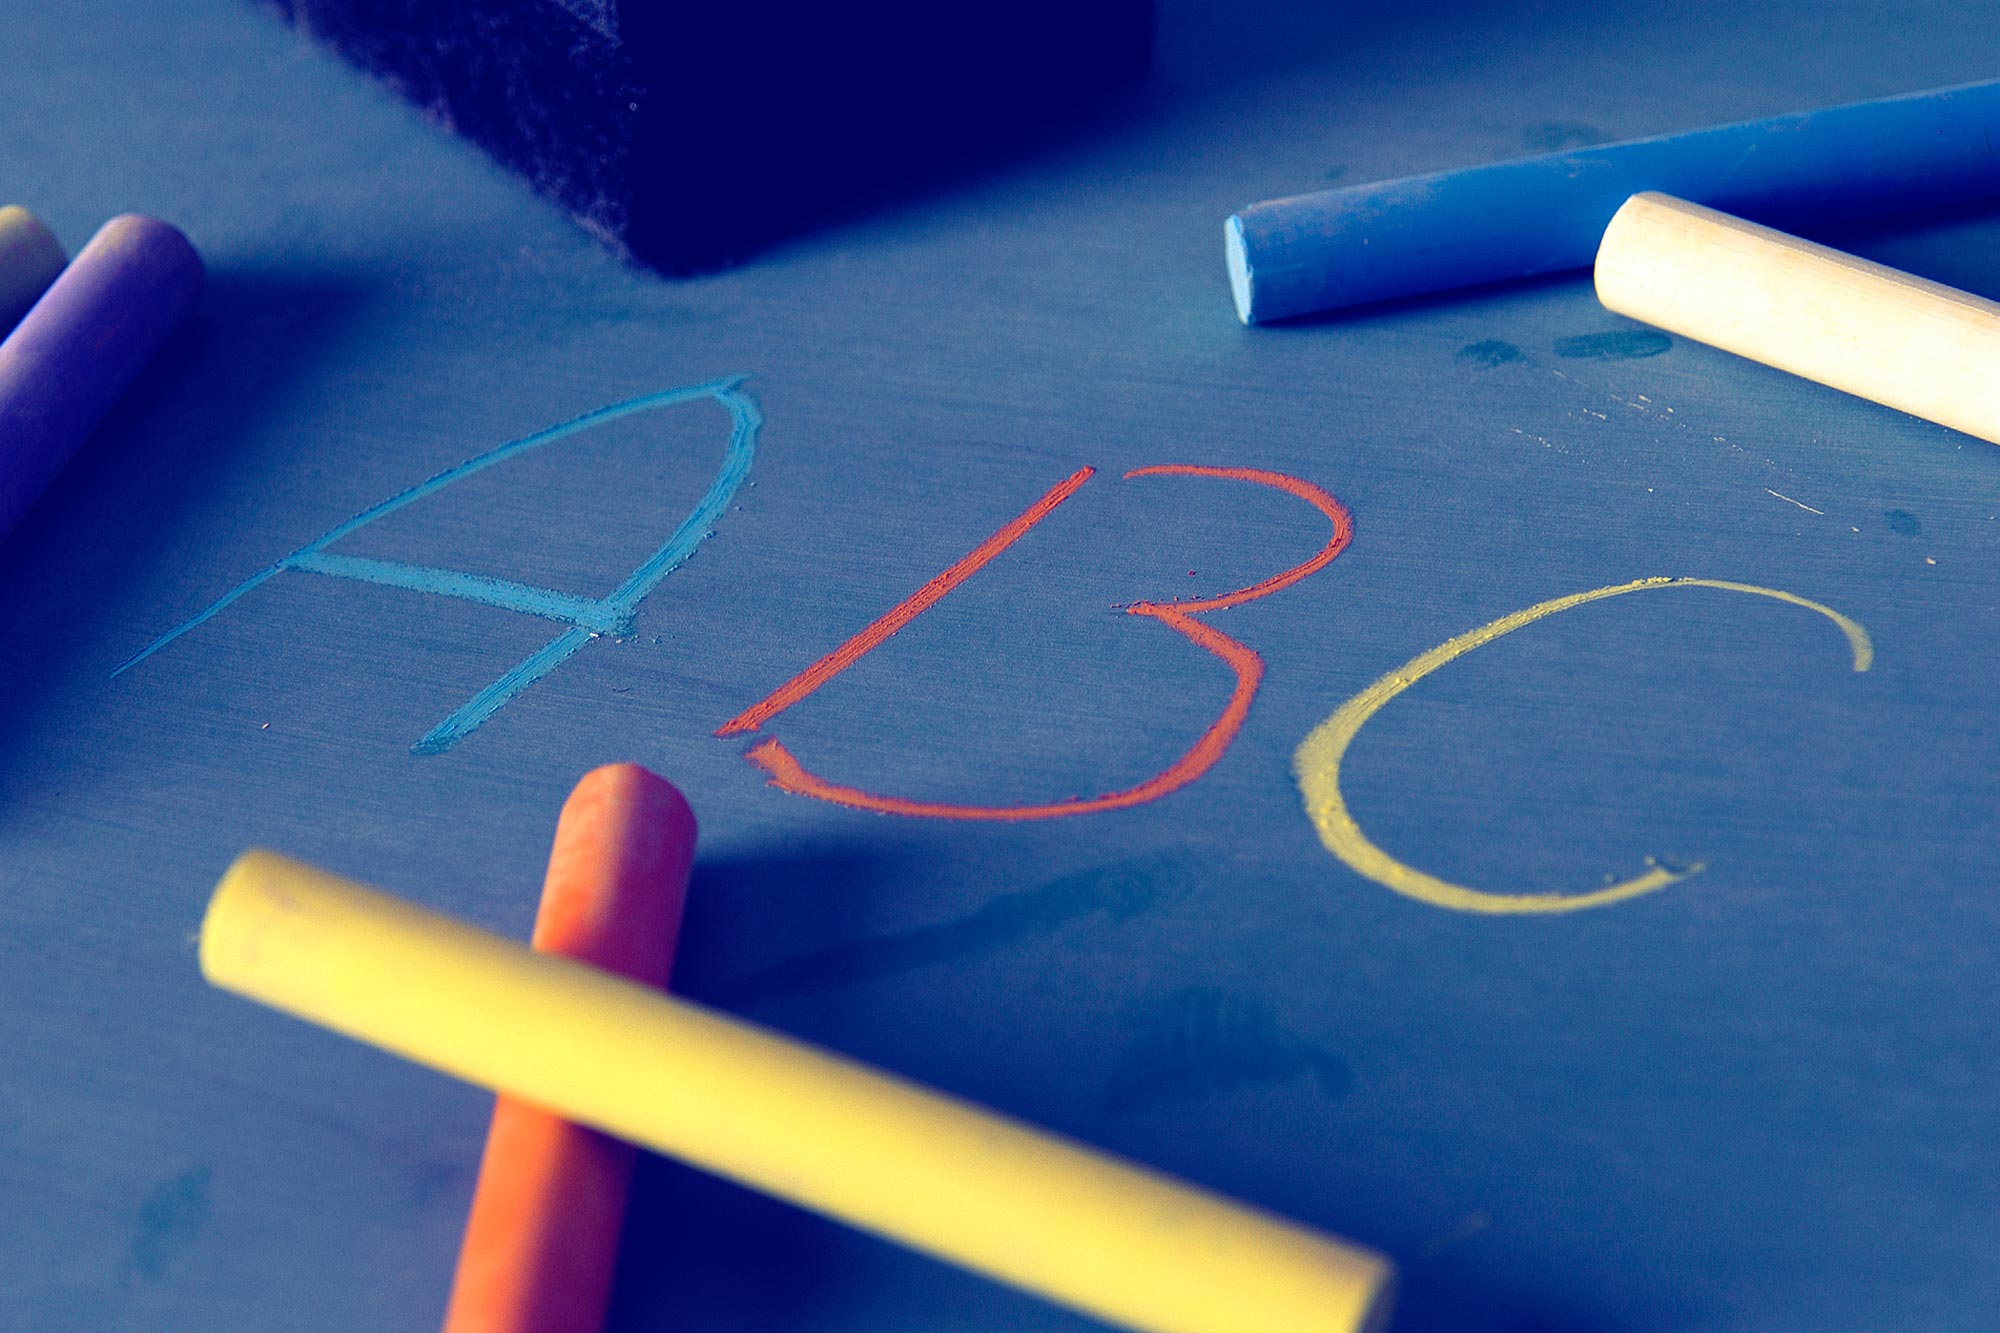 ABC written on a chalkboard with Blue, orange, and yellow chalk